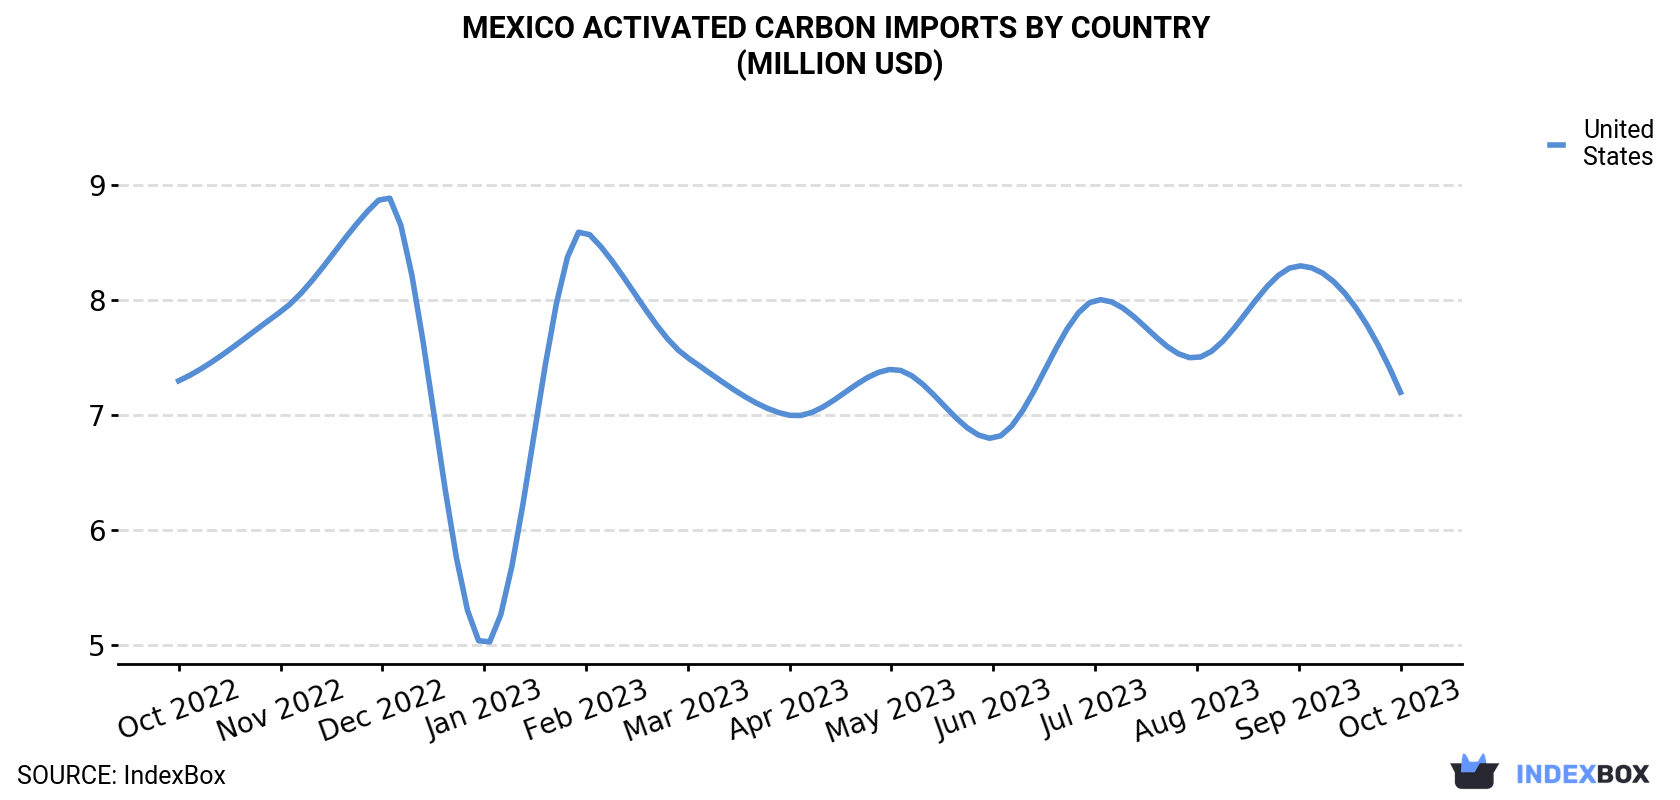 Mexico Activated Carbon Imports By Country (Million USD)